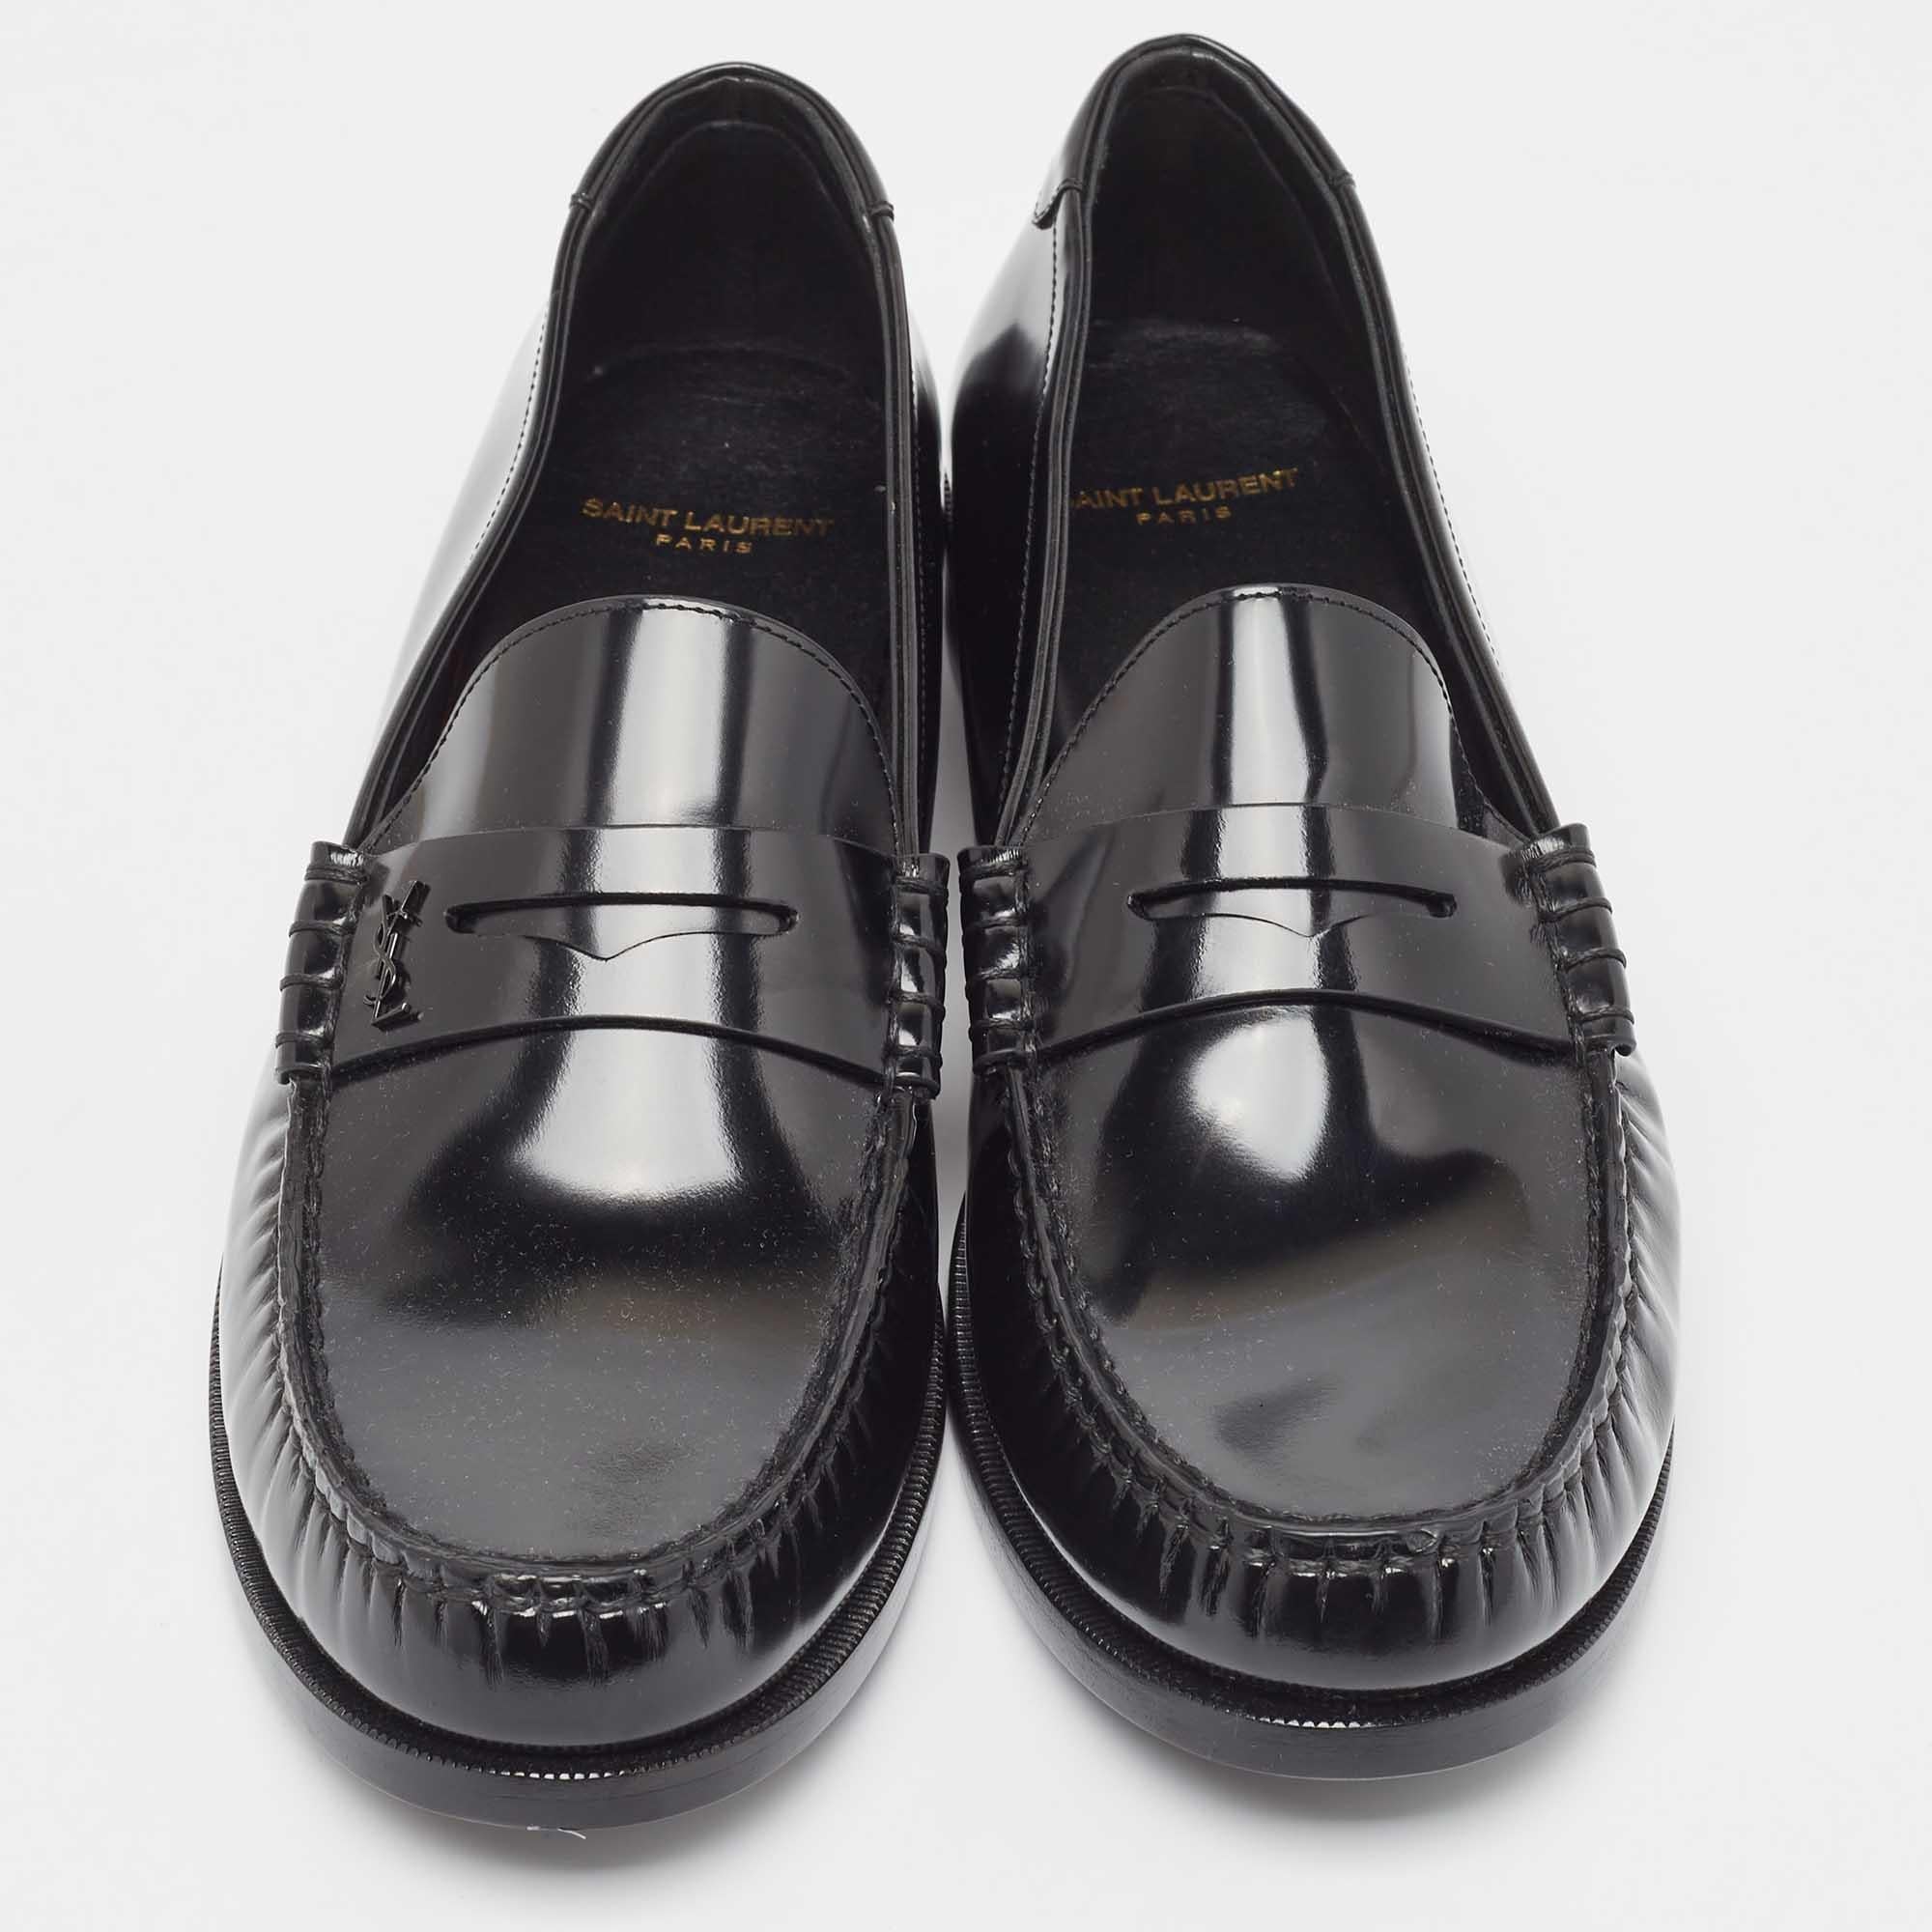 Complete your look by adding these designer loafers to your collection of everyday footwear. They are crafted skilfully to grant the perfect fit and style.

Includes: Original Dustbag

